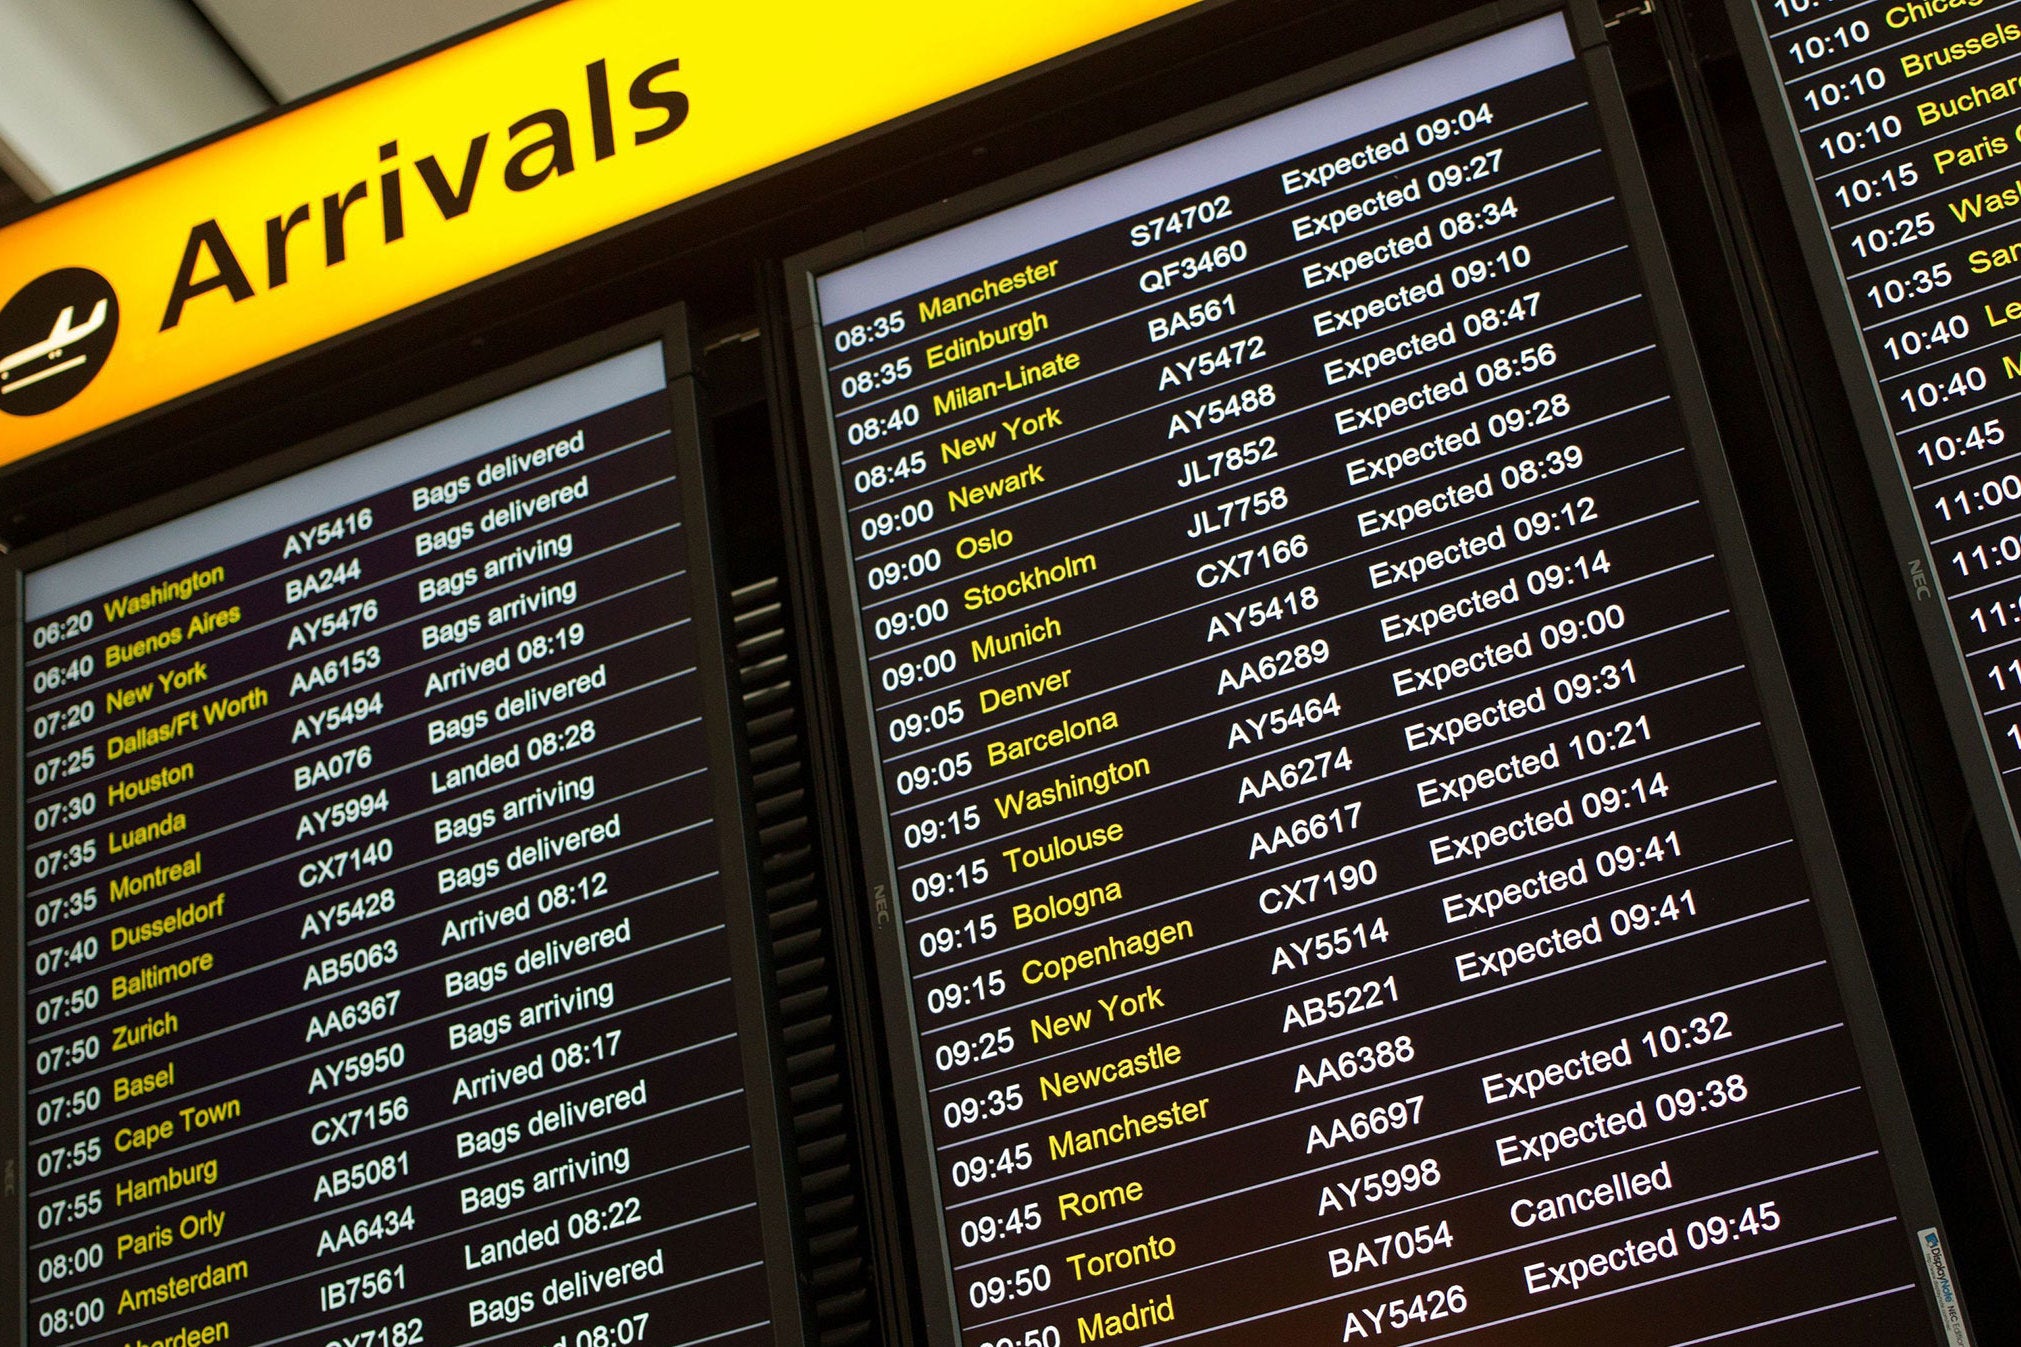 Under EU law, airlines are required to pay compensation to passengers when their flights are delayed or cancelled